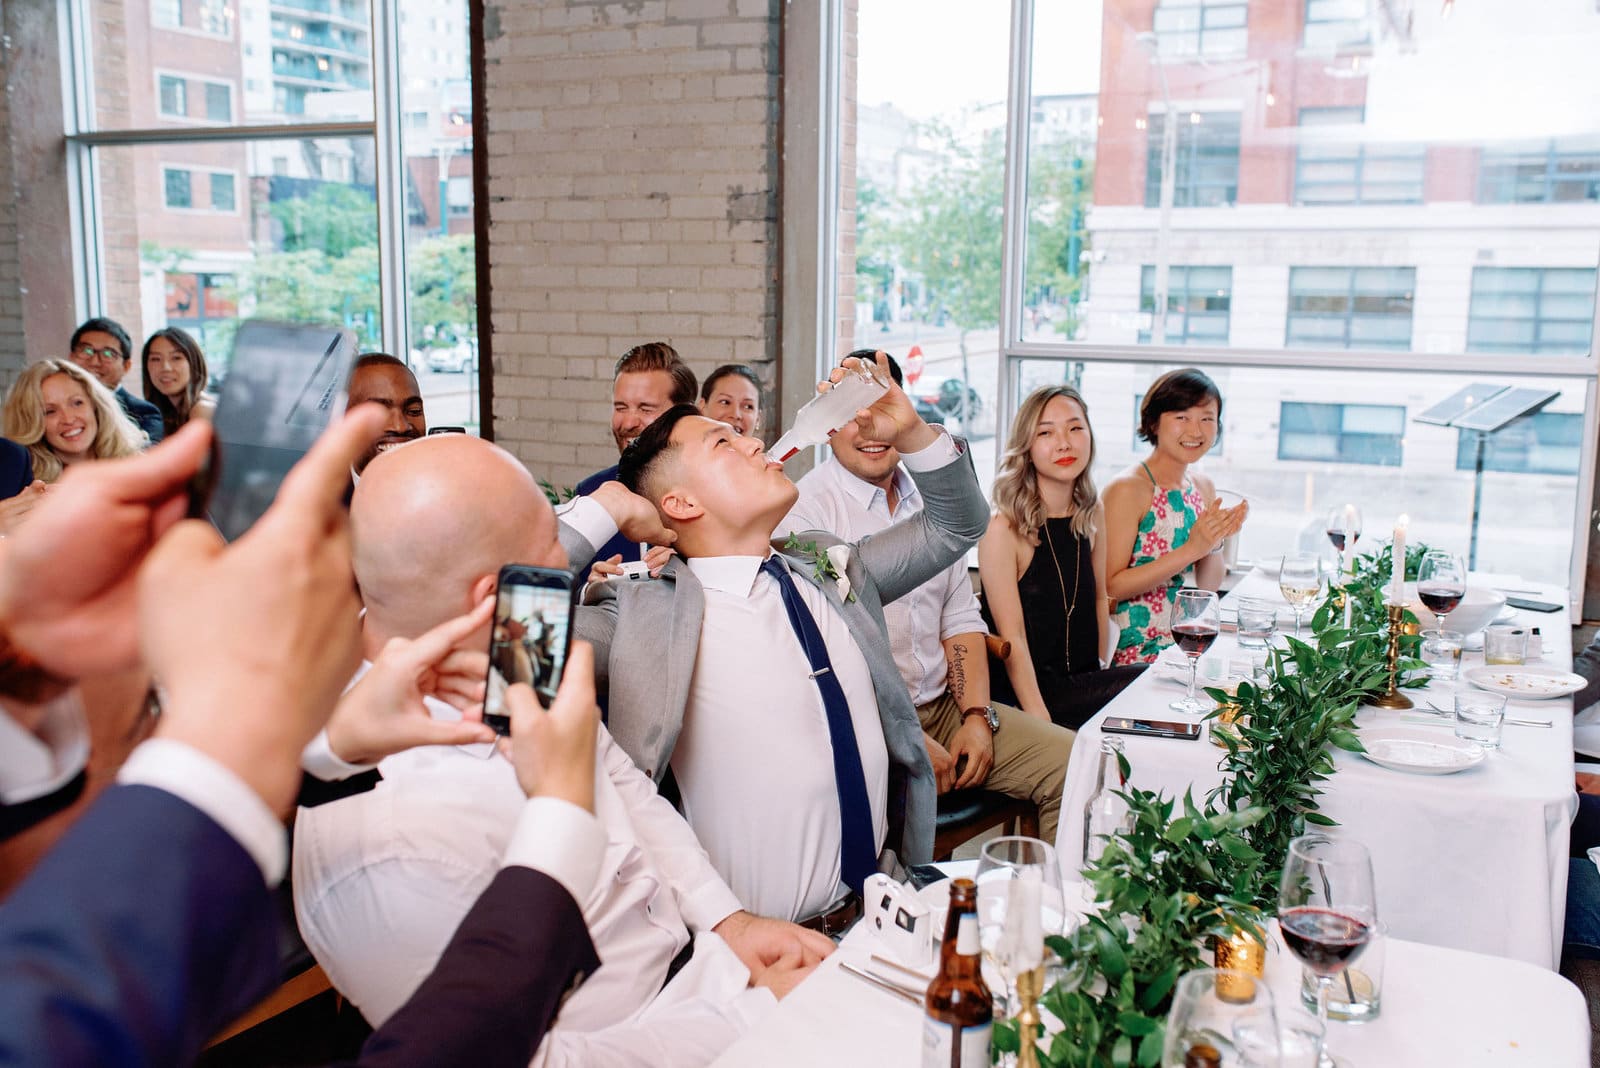 Groom Gets Iced Smirnoff During Reception at Hotel Ocho Downtown Toronto Wedding Photographer Jacqueline James Photography